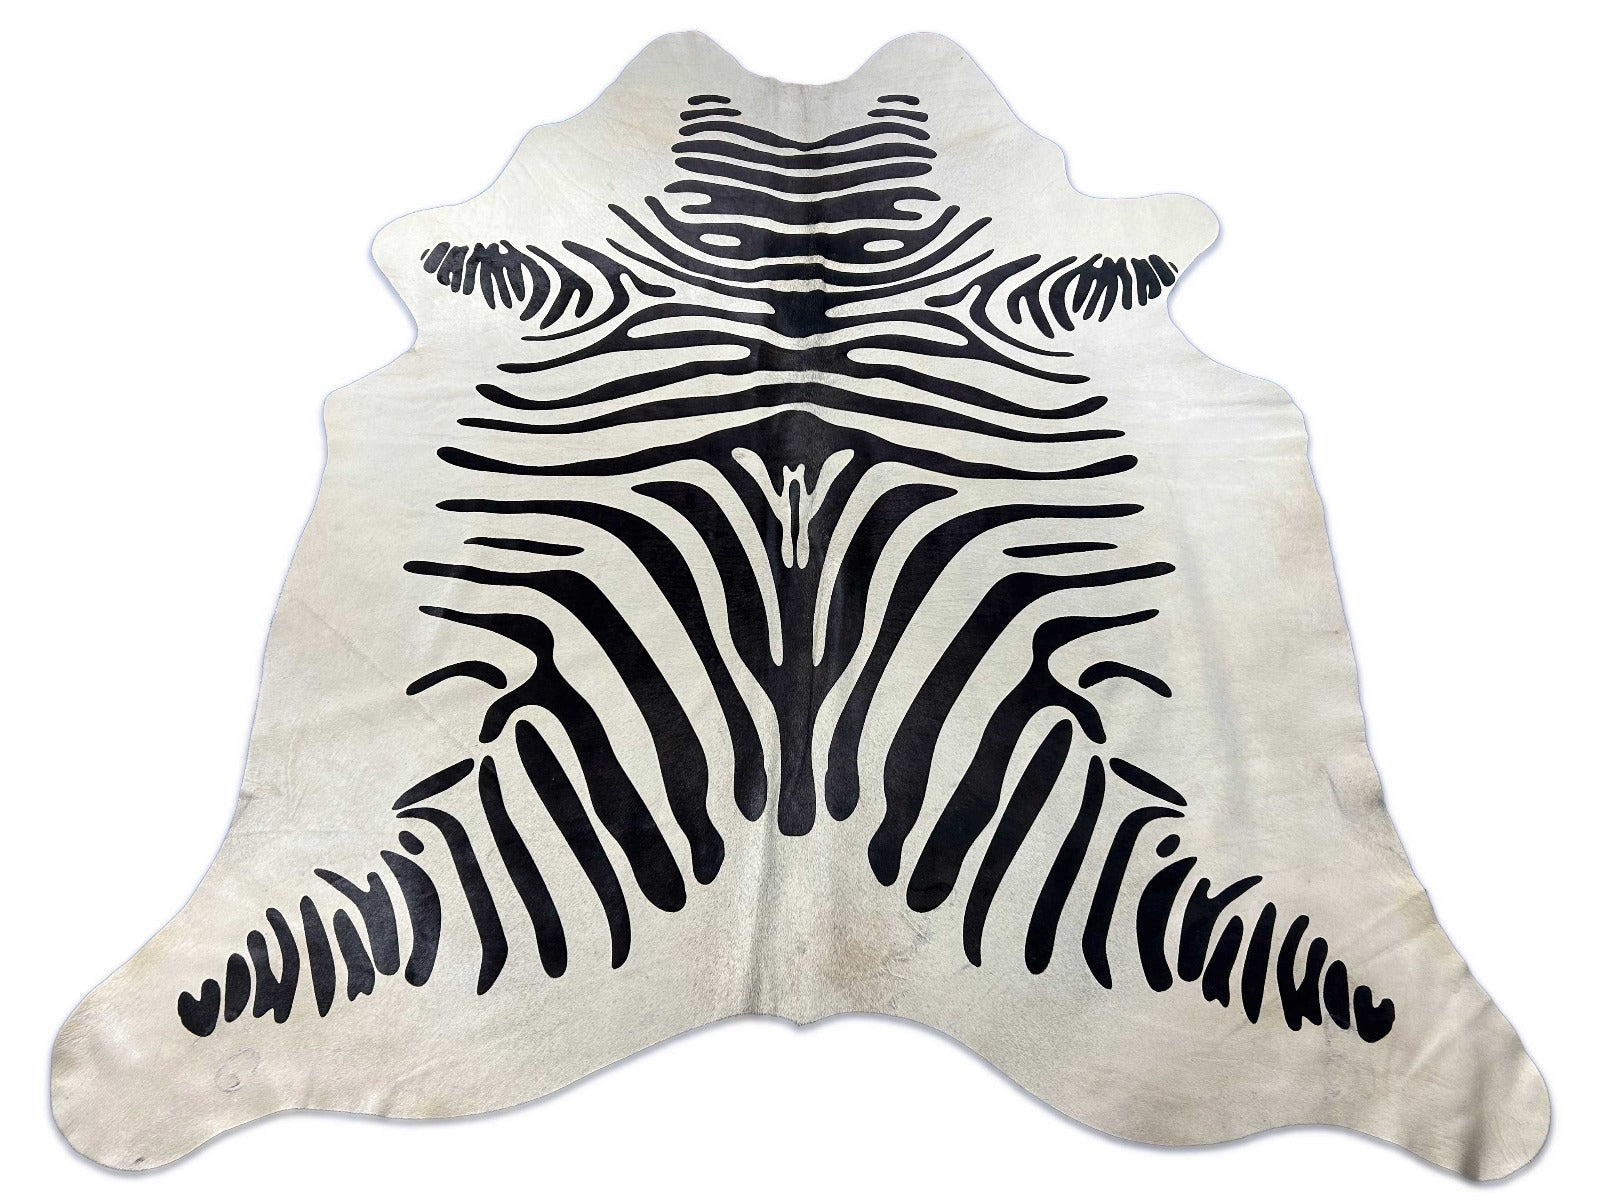 Zebra Print Cowhide Rug (fire brands/ light background but a bit greyish in the middle) Size: 7x6 feet C-1858